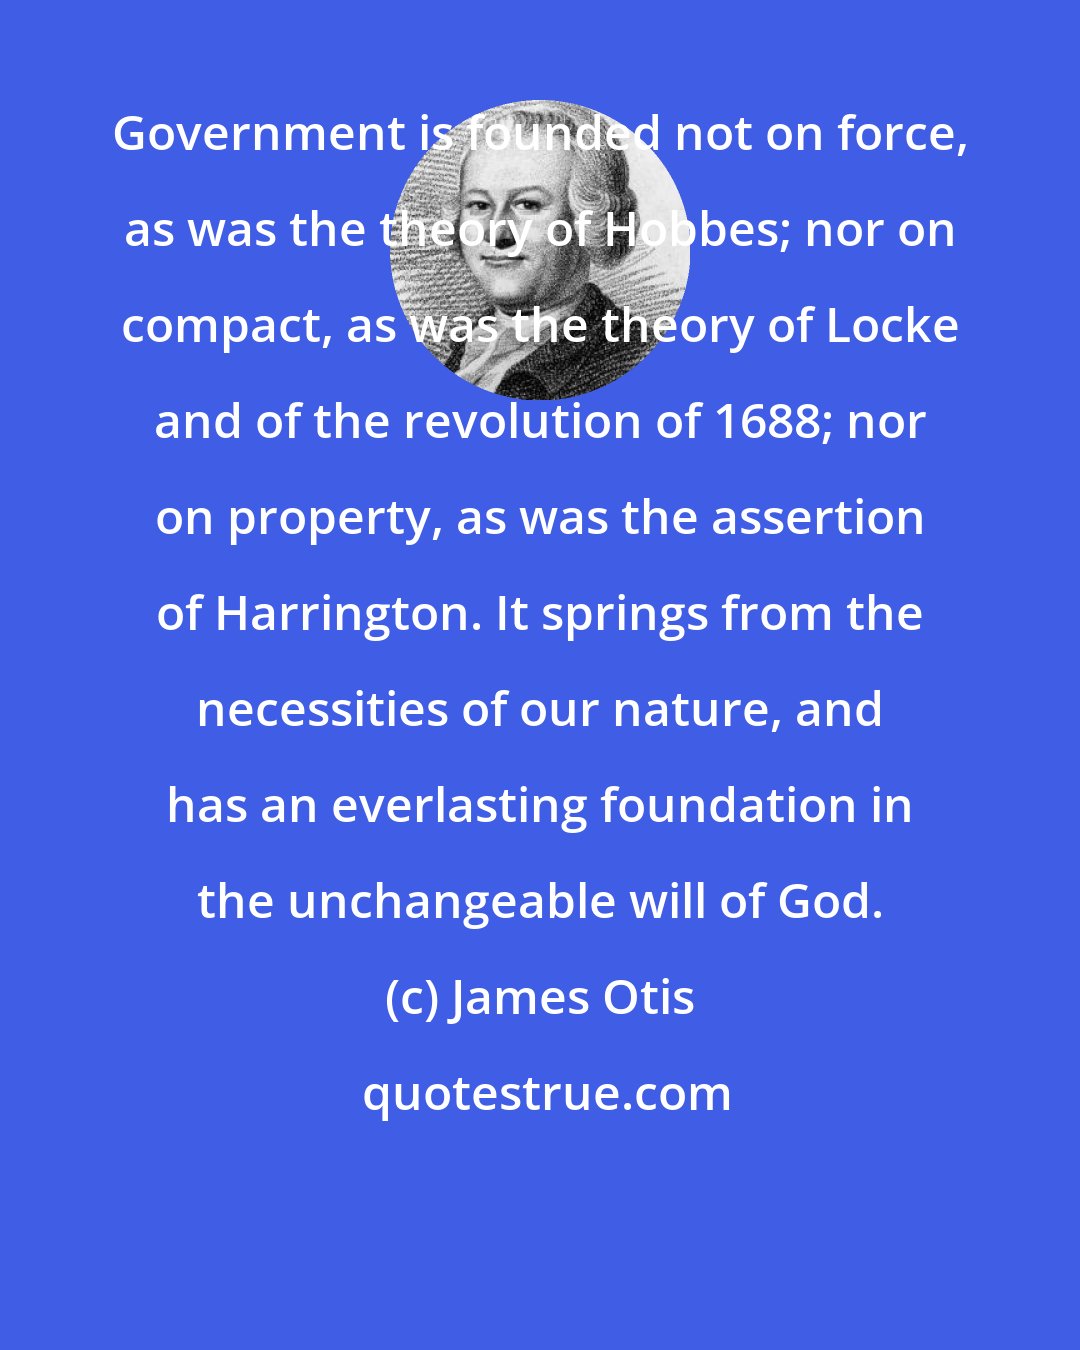 James Otis: Government is founded not on force, as was the theory of Hobbes; nor on compact, as was the theory of Locke and of the revolution of 1688; nor on property, as was the assertion of Harrington. It springs from the necessities of our nature, and has an everlasting foundation in the unchangeable will of God.